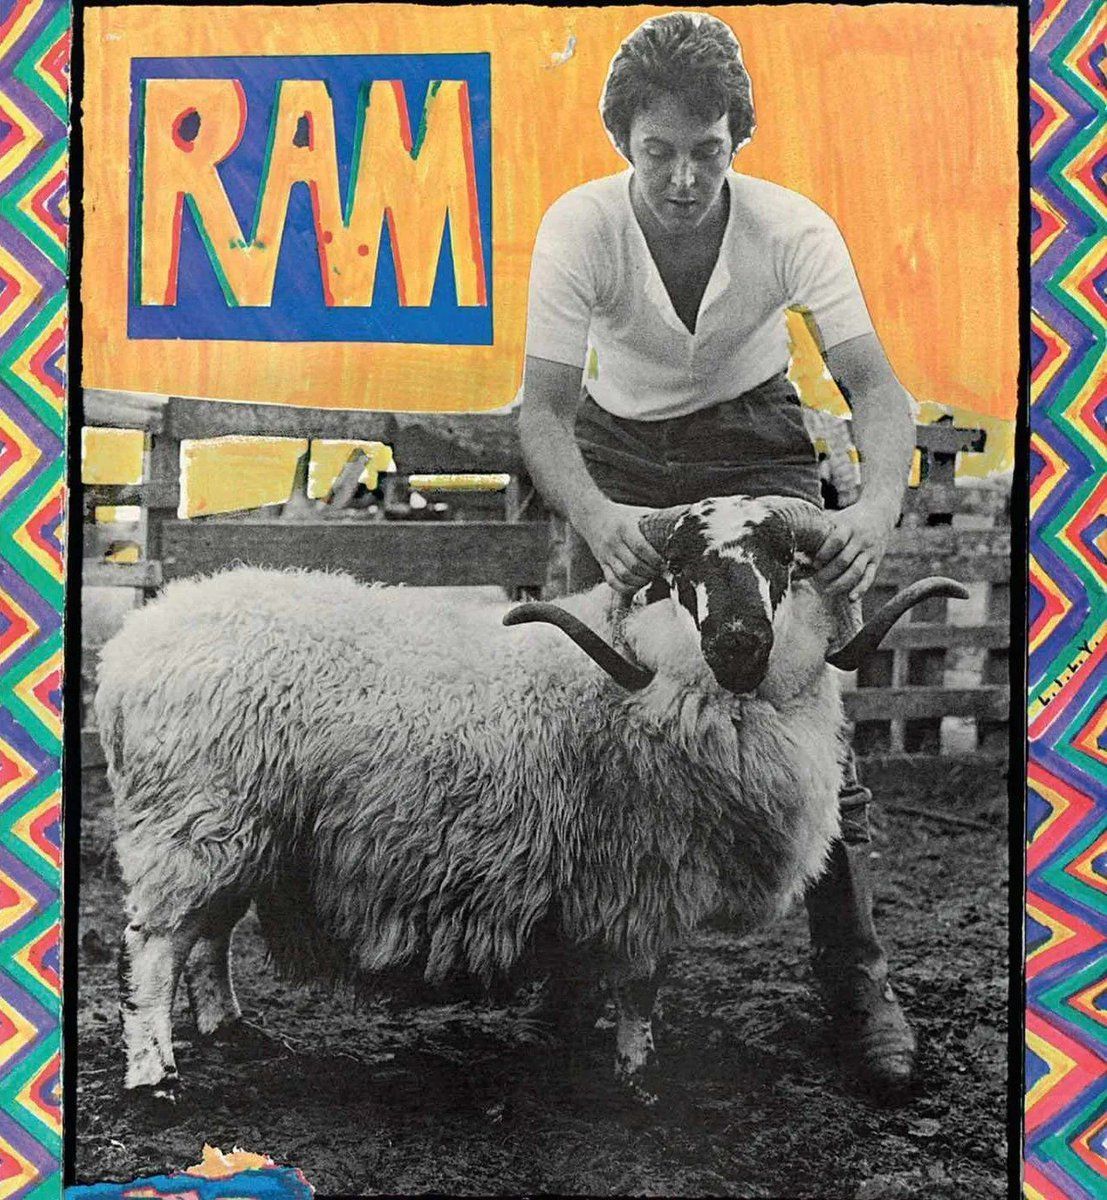 On this day in 1971, Paul and Linda McCartney released their album “Ram”. 

Initially slammed by critics, it is now considered to be one of the best albums of all time and to have paved the way for the genres of indie rock and pop.

What’s your favorite song from the album?